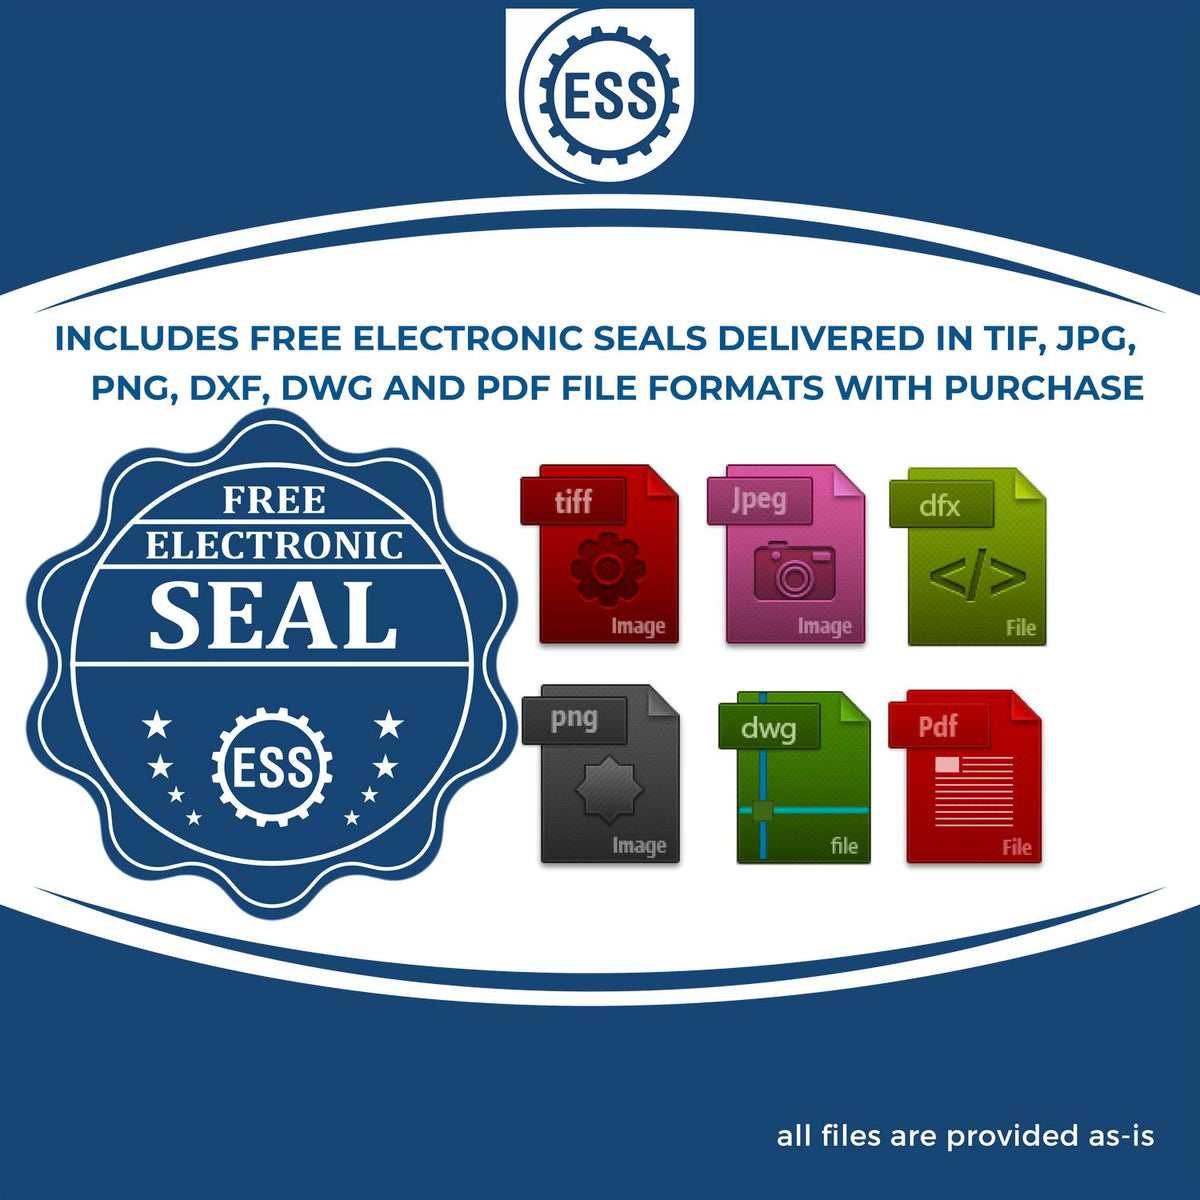 An infographic for the free electronic seal for the Wooden Handle Florida Rectangular Notary Public Stamp illustrating the different file type icons such as DXF, DWG, TIF, JPG and PNG.